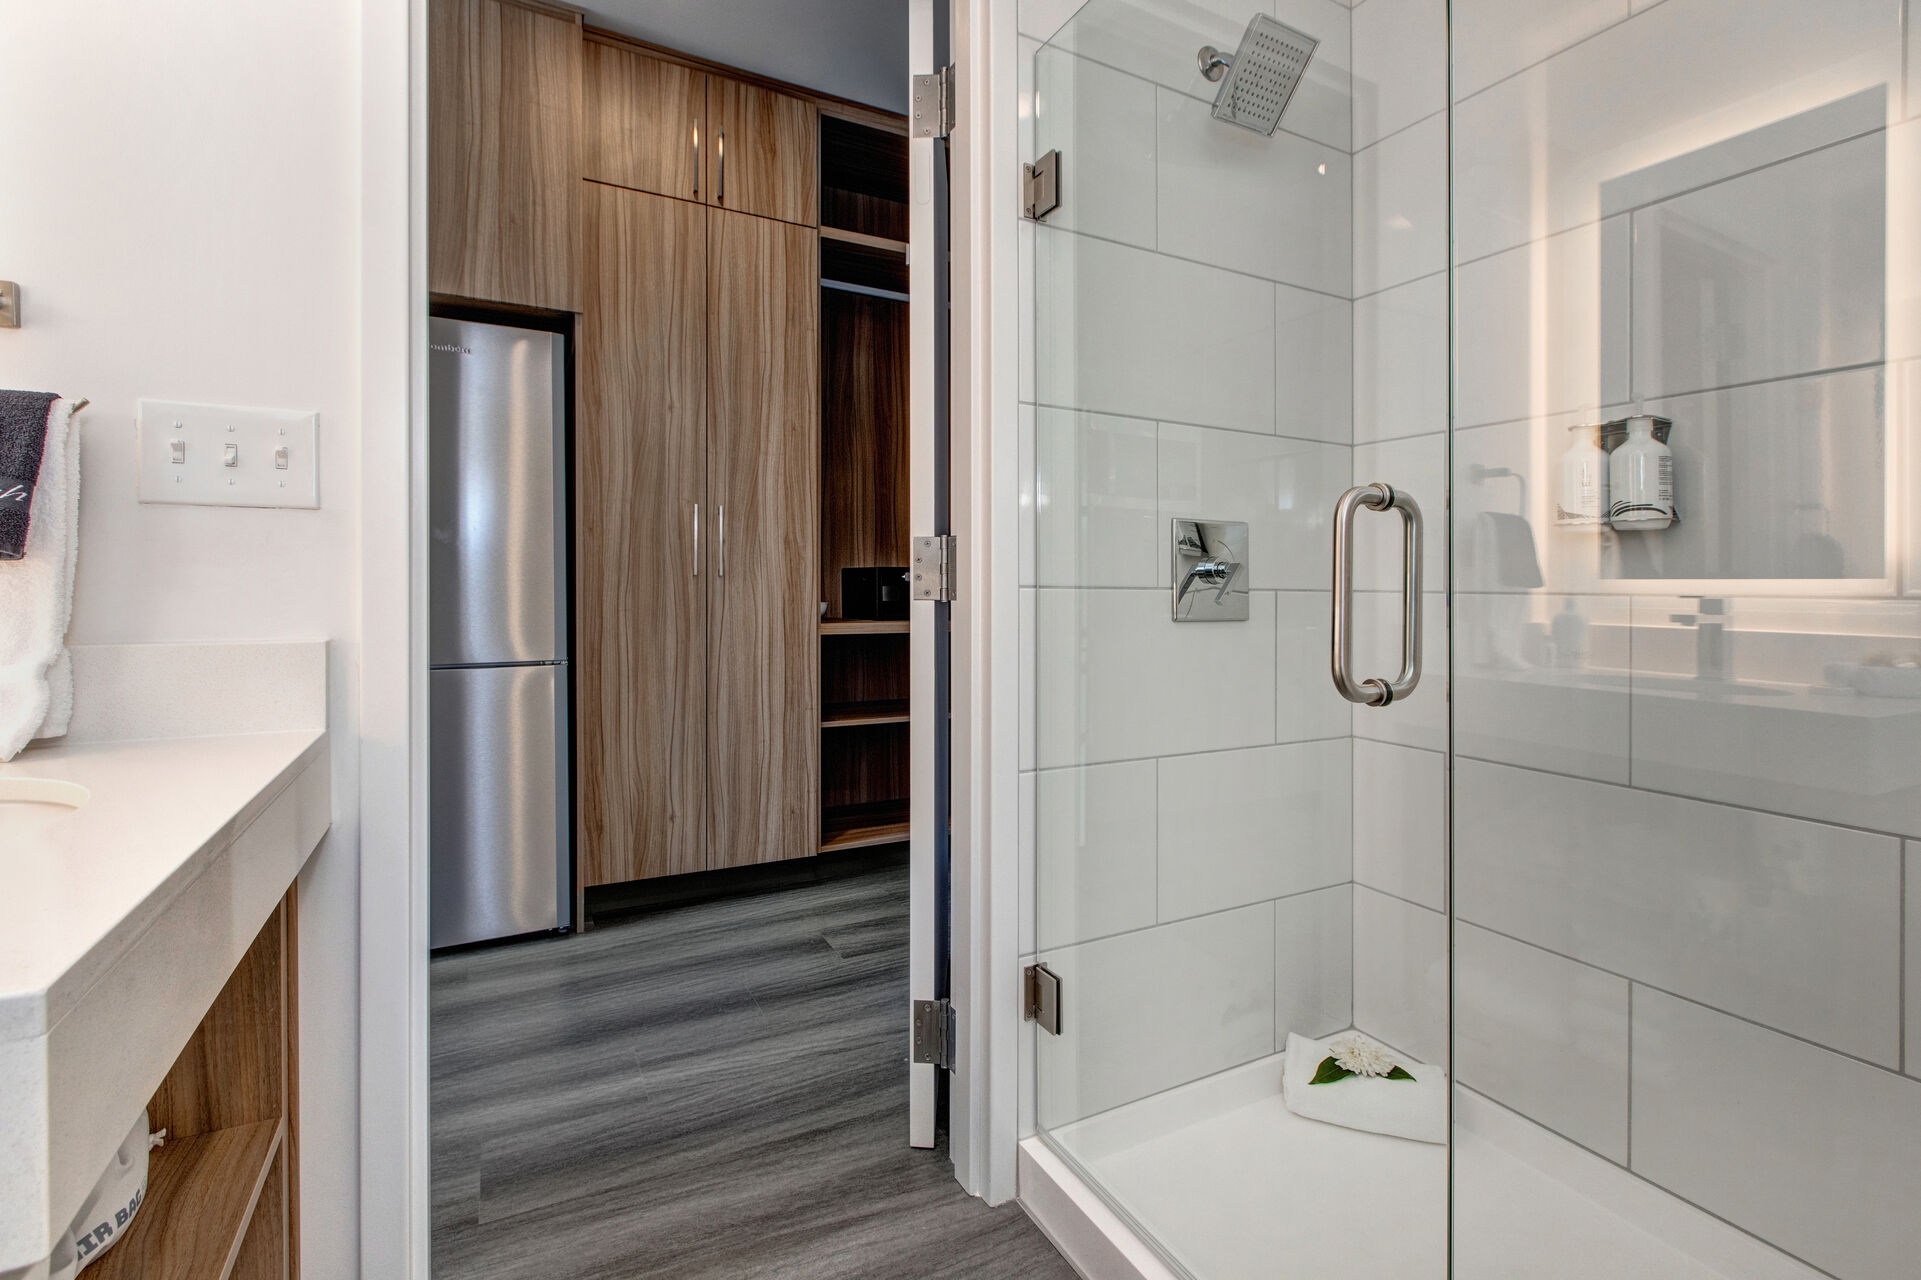 Full Shared Bath with a Tile & Glass Shower